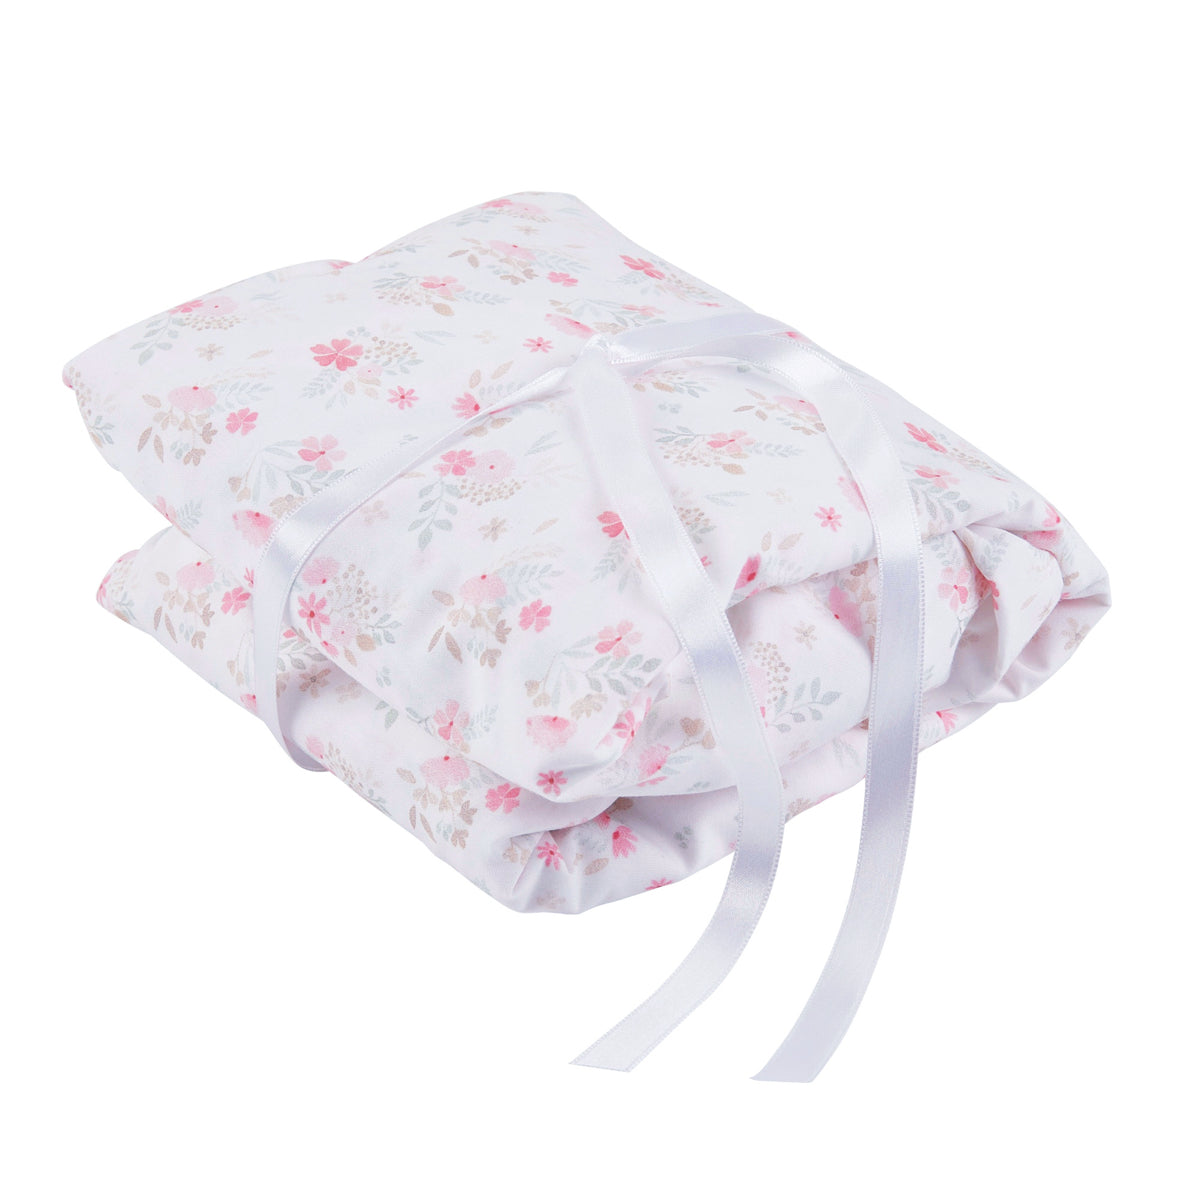 Theophile & Patachou Cot Bed Fitted Sheet 70 x 140 cm - Pink Flower